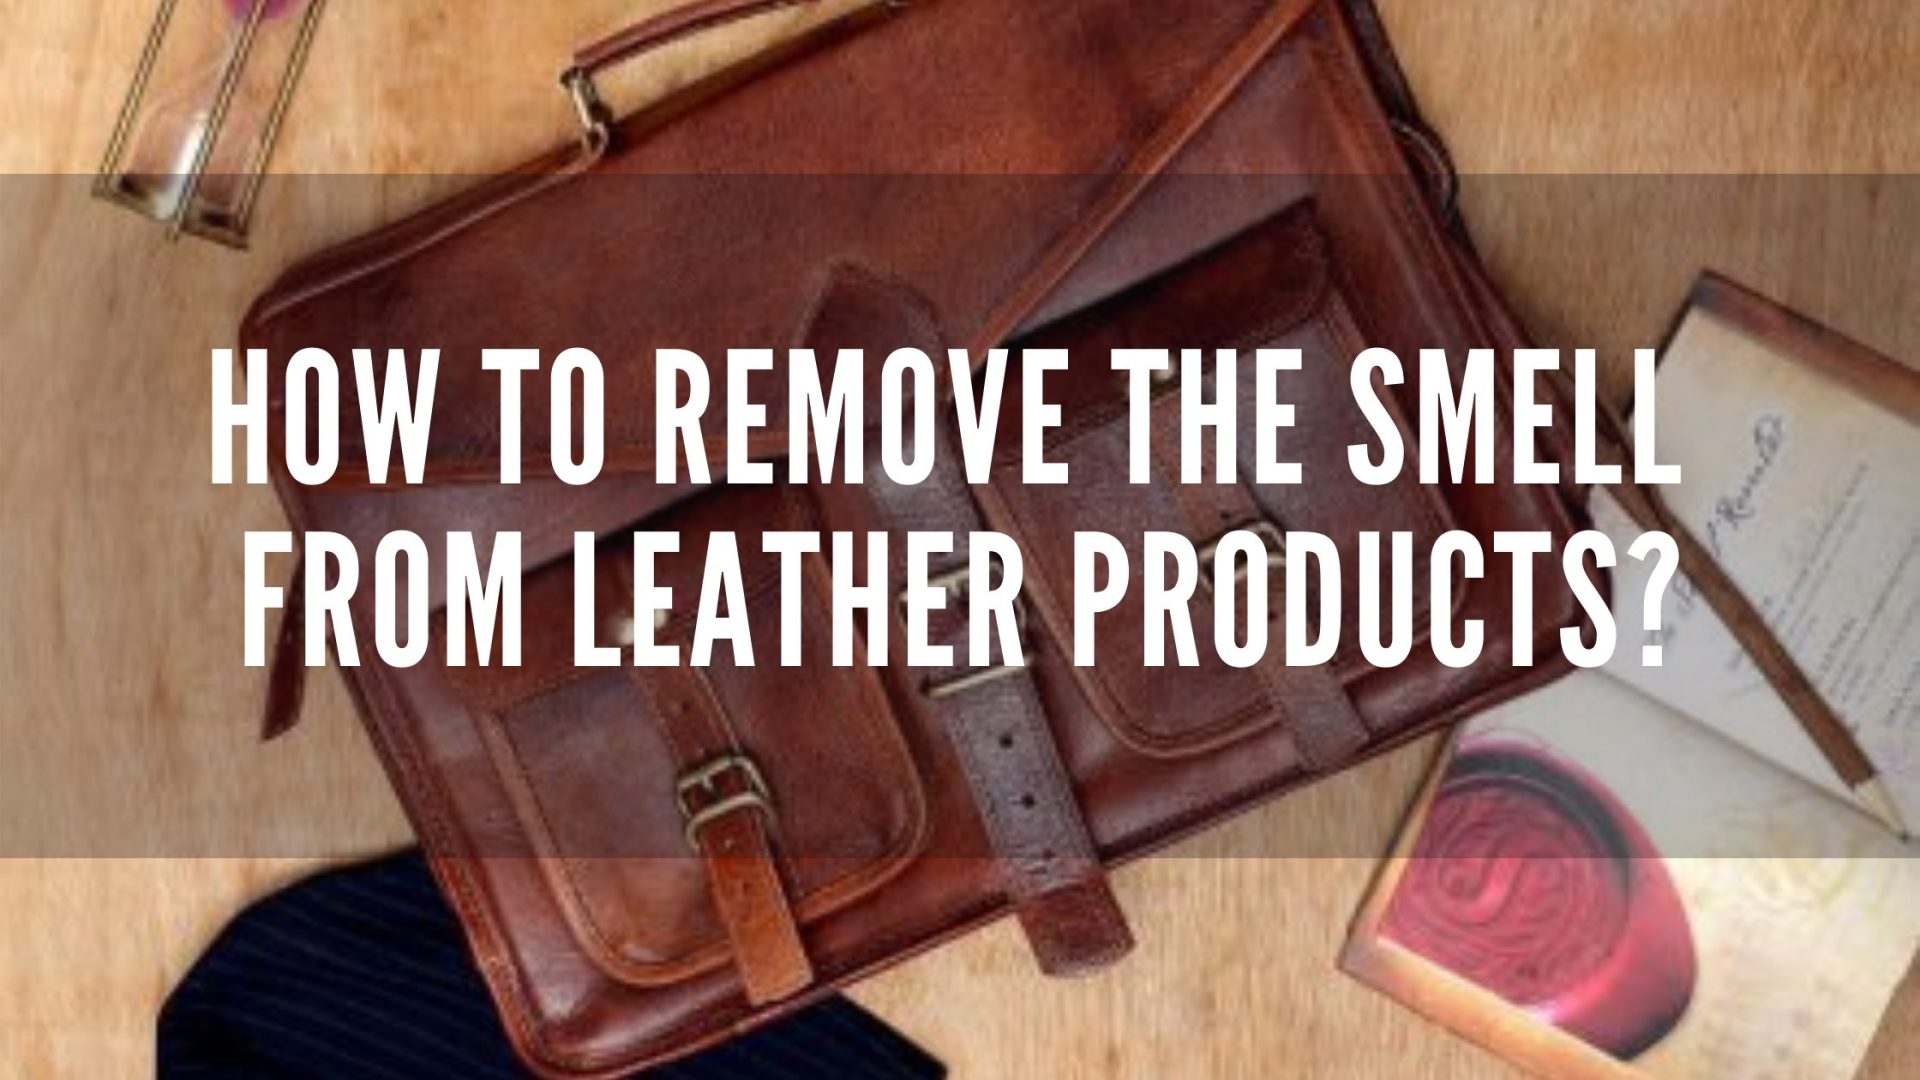 How to remove the smell from Leather Products?